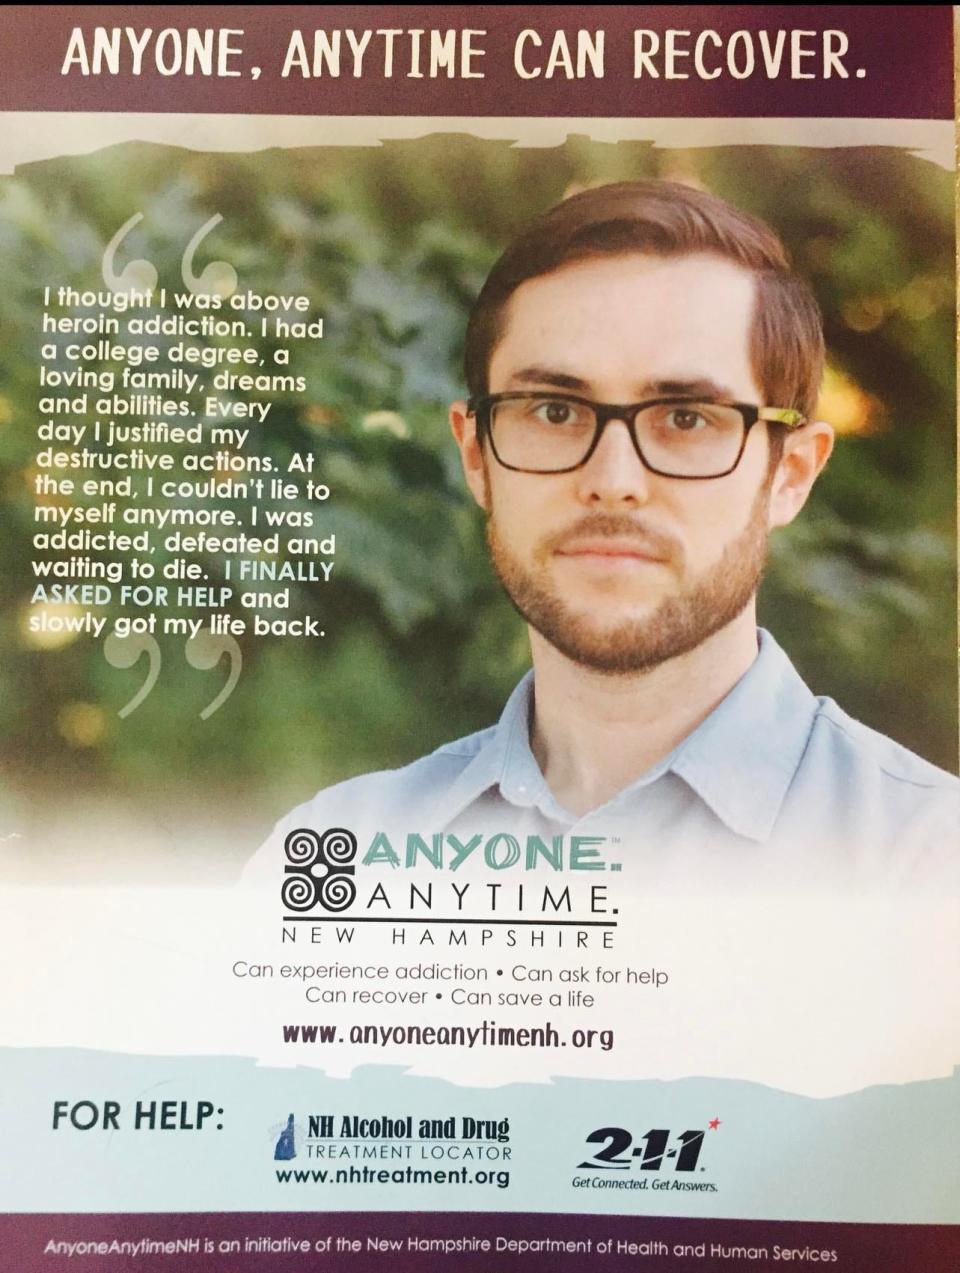 Dean LeMire helped found and was involved in leading numerous organizations in the recovery community in the Seacoast and around New Hamsphire.